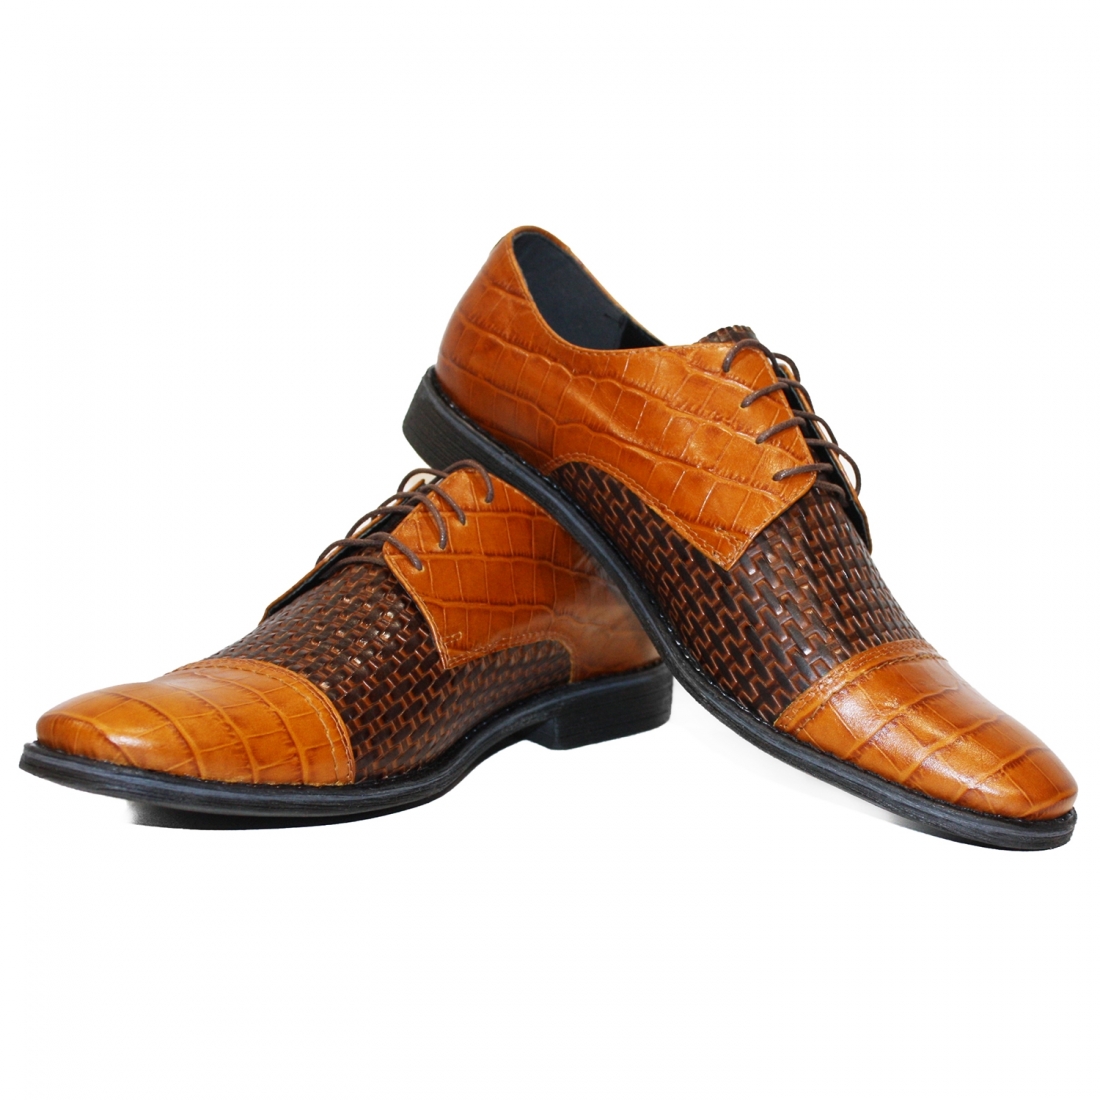 Modello Gutersso - Chaussure Classique - Handmade Colorful Italian Leather Shoes